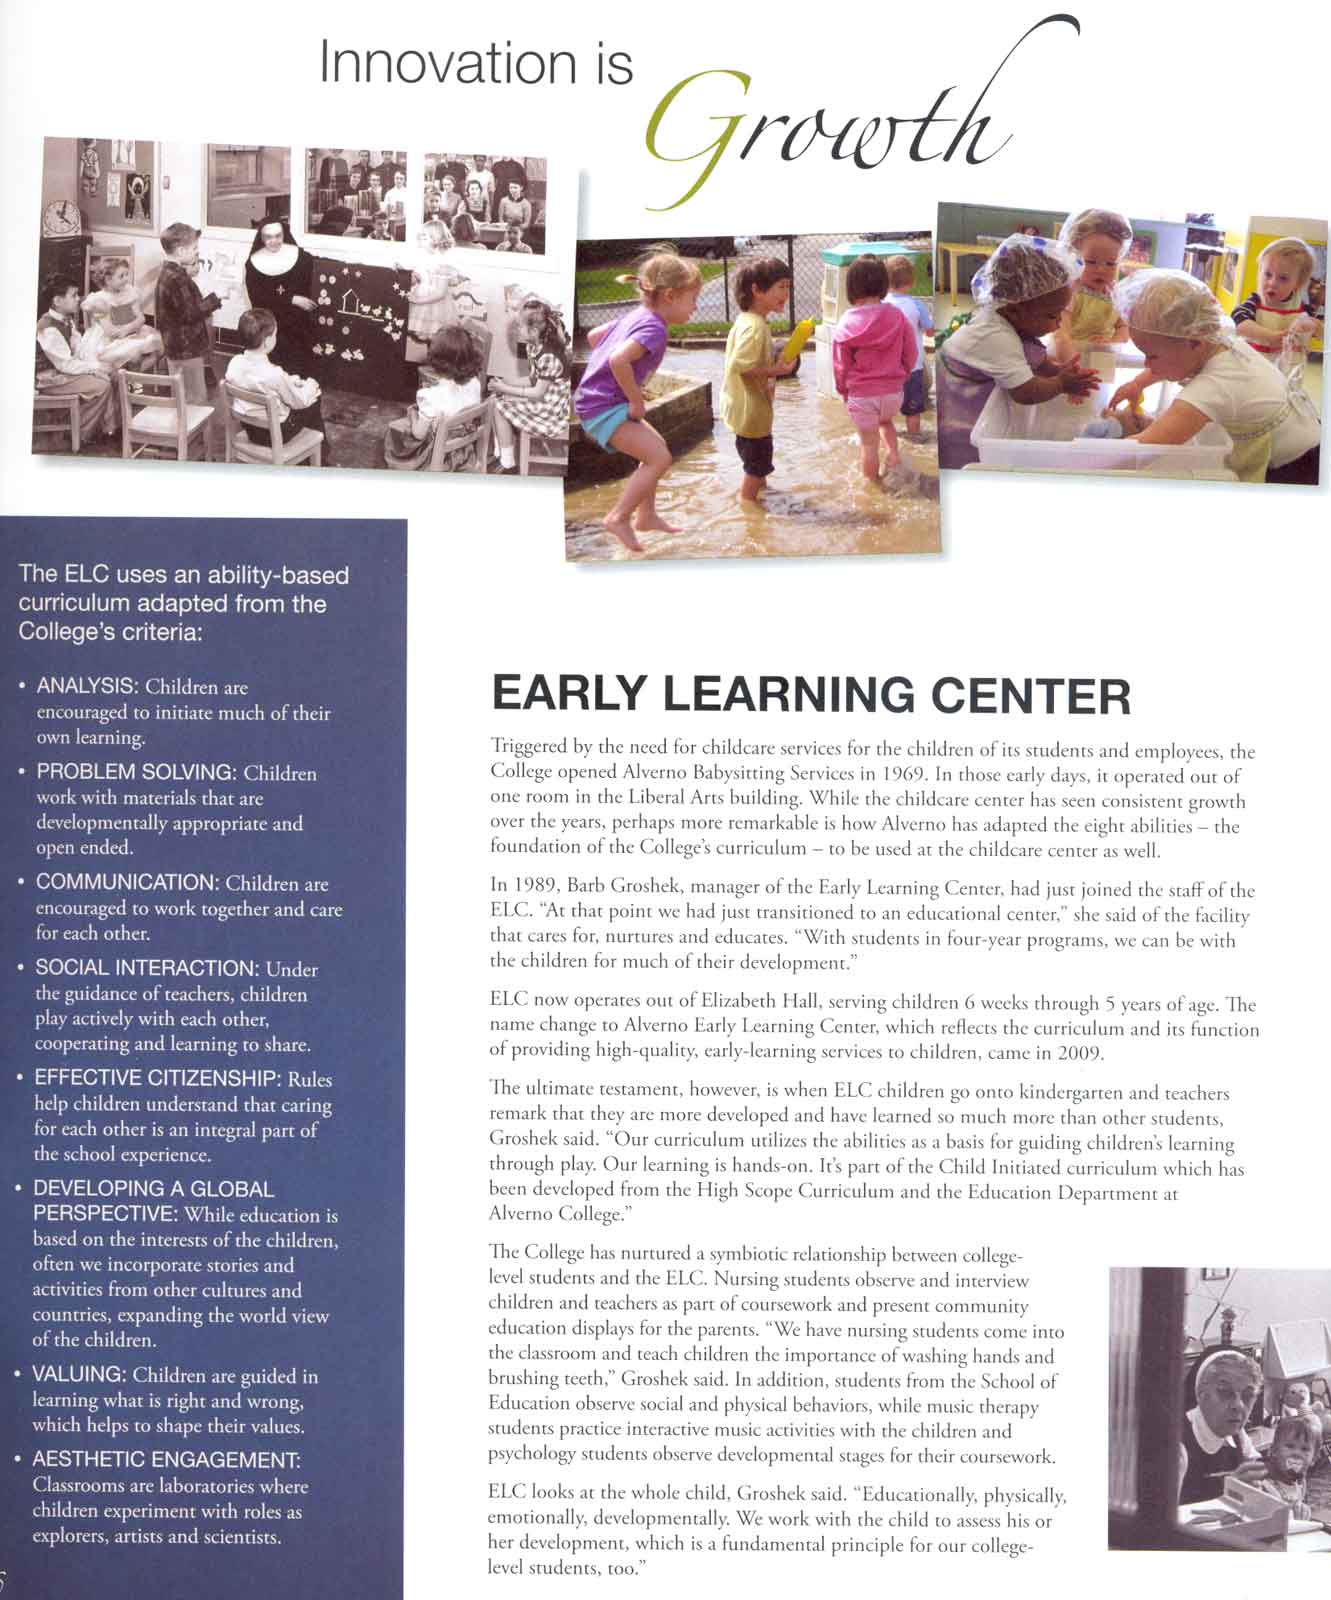 Article about the Alverno College Early learning Center